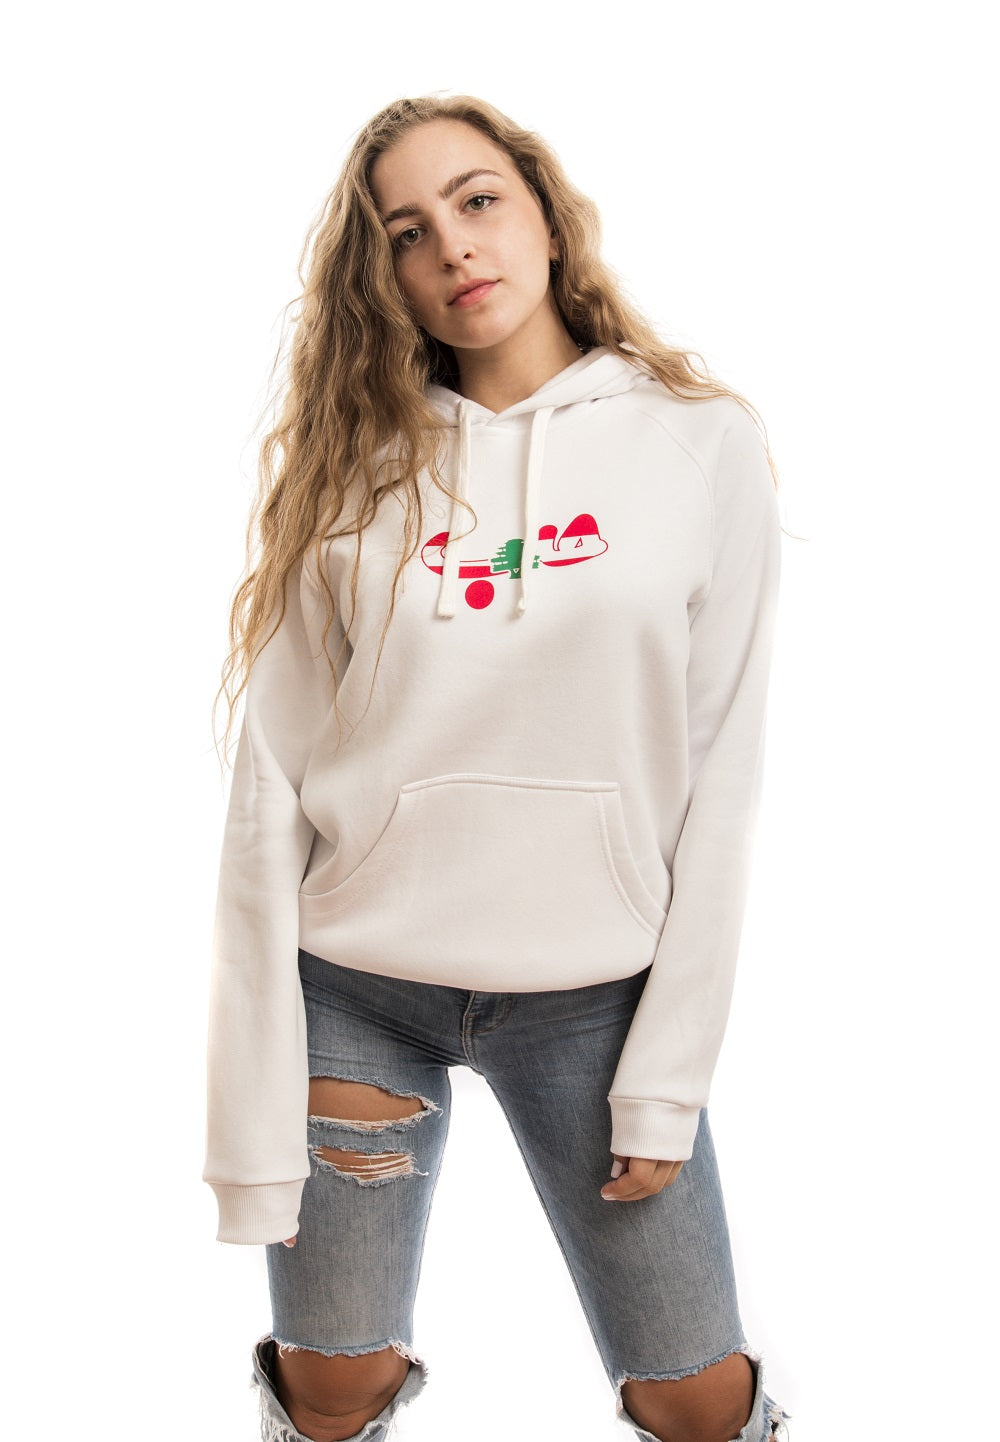 Shop The Latest Collection Of Boshies White Hoodie X Silkscreen Lebanese Love حب In Lebanon